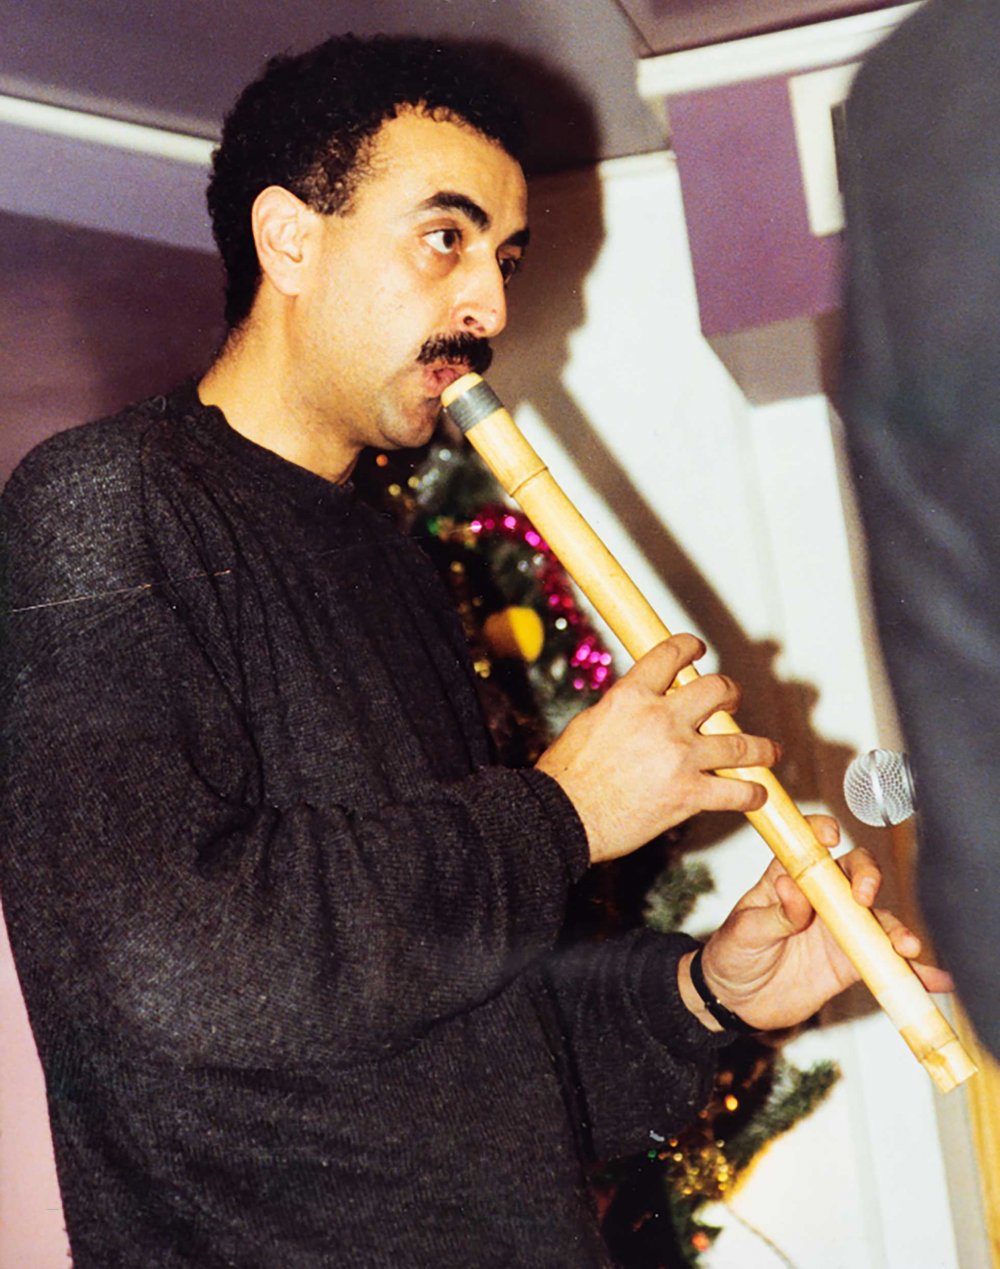 Said Murad playing the flute in a performance held at Al Kasaba Theatre, Ramallah, 1994